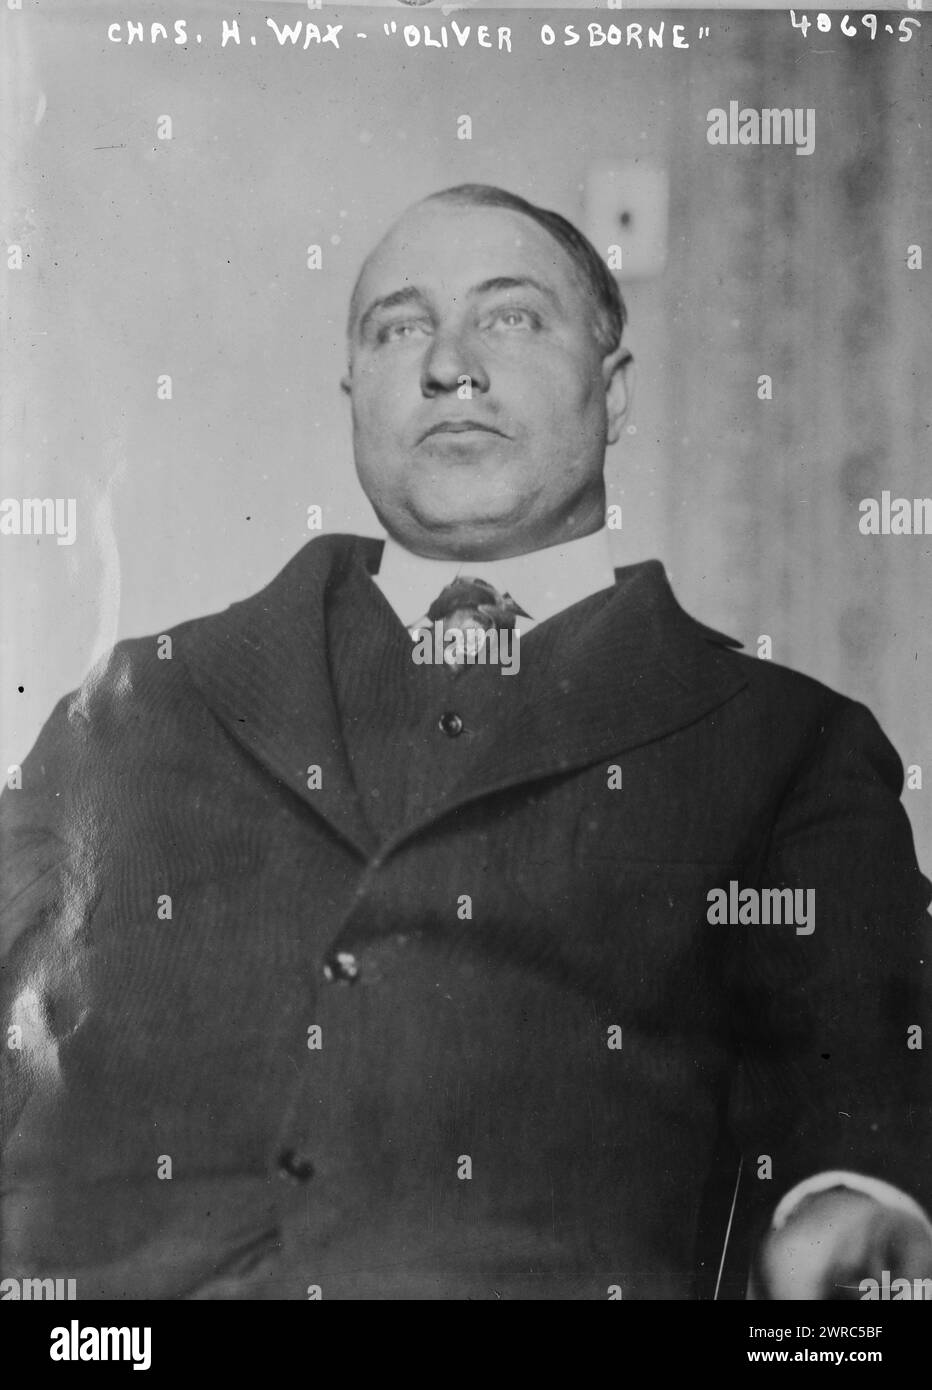 Chas. H. Wax, 'Oliver Osborne', Photograph shows Charles H. Wax, alias Oliver Osborne who was under investigation for swindling women. Photograph taken at the Federal Court Building in New York City, Dec. 6, 1916., 1916 Dec. 6, Glass negatives, 1 negative: glass Stock Photo